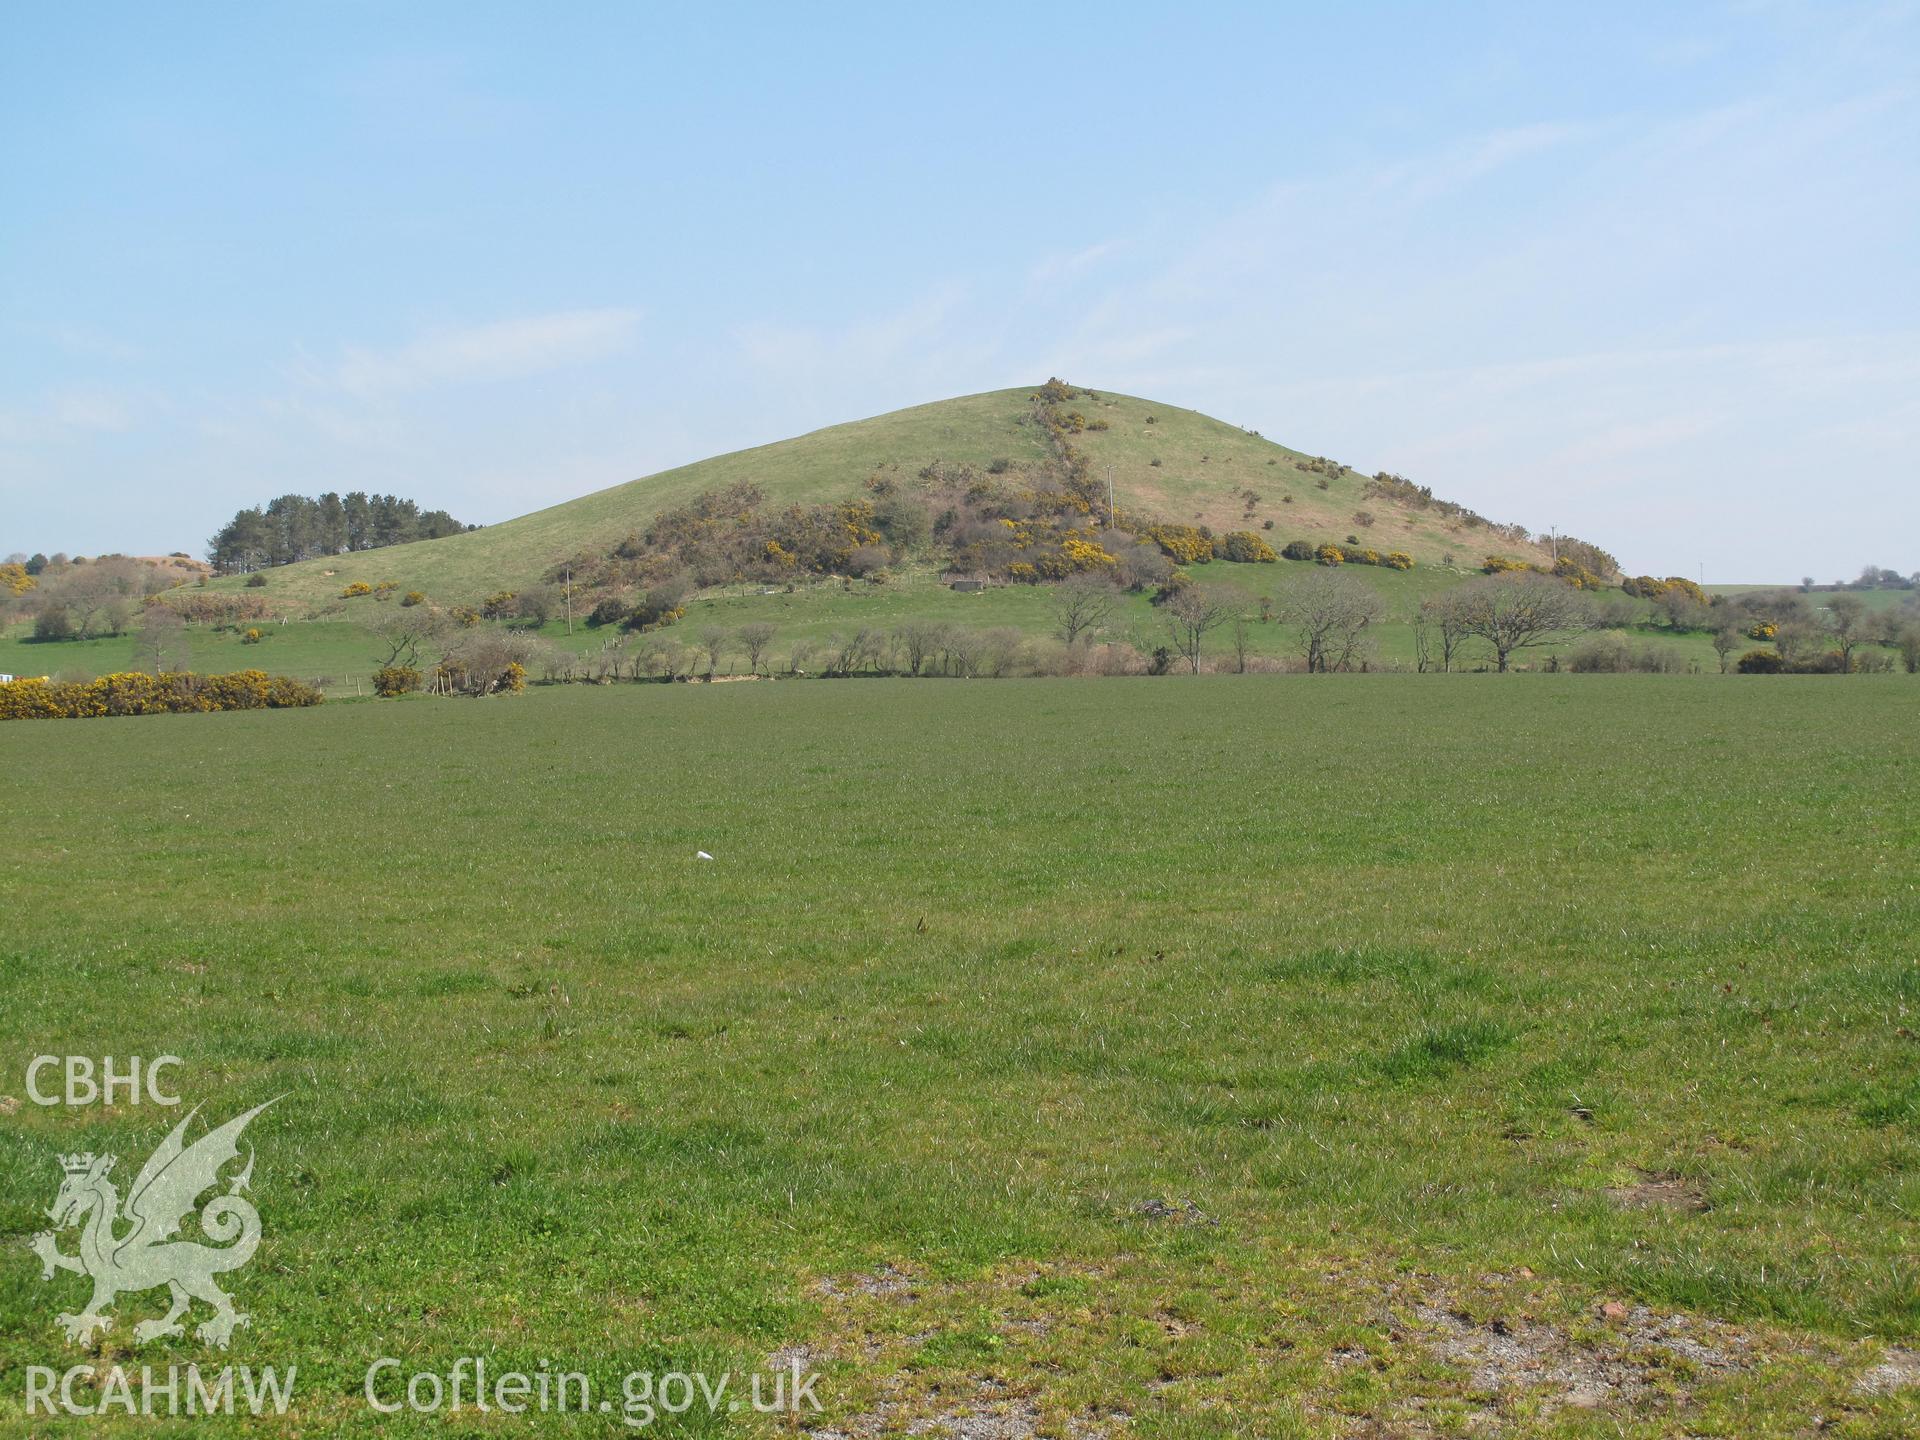 View of Crug Mawr, near Cardigan, from the west, taken by Brian Malaws on 14 April 2010.